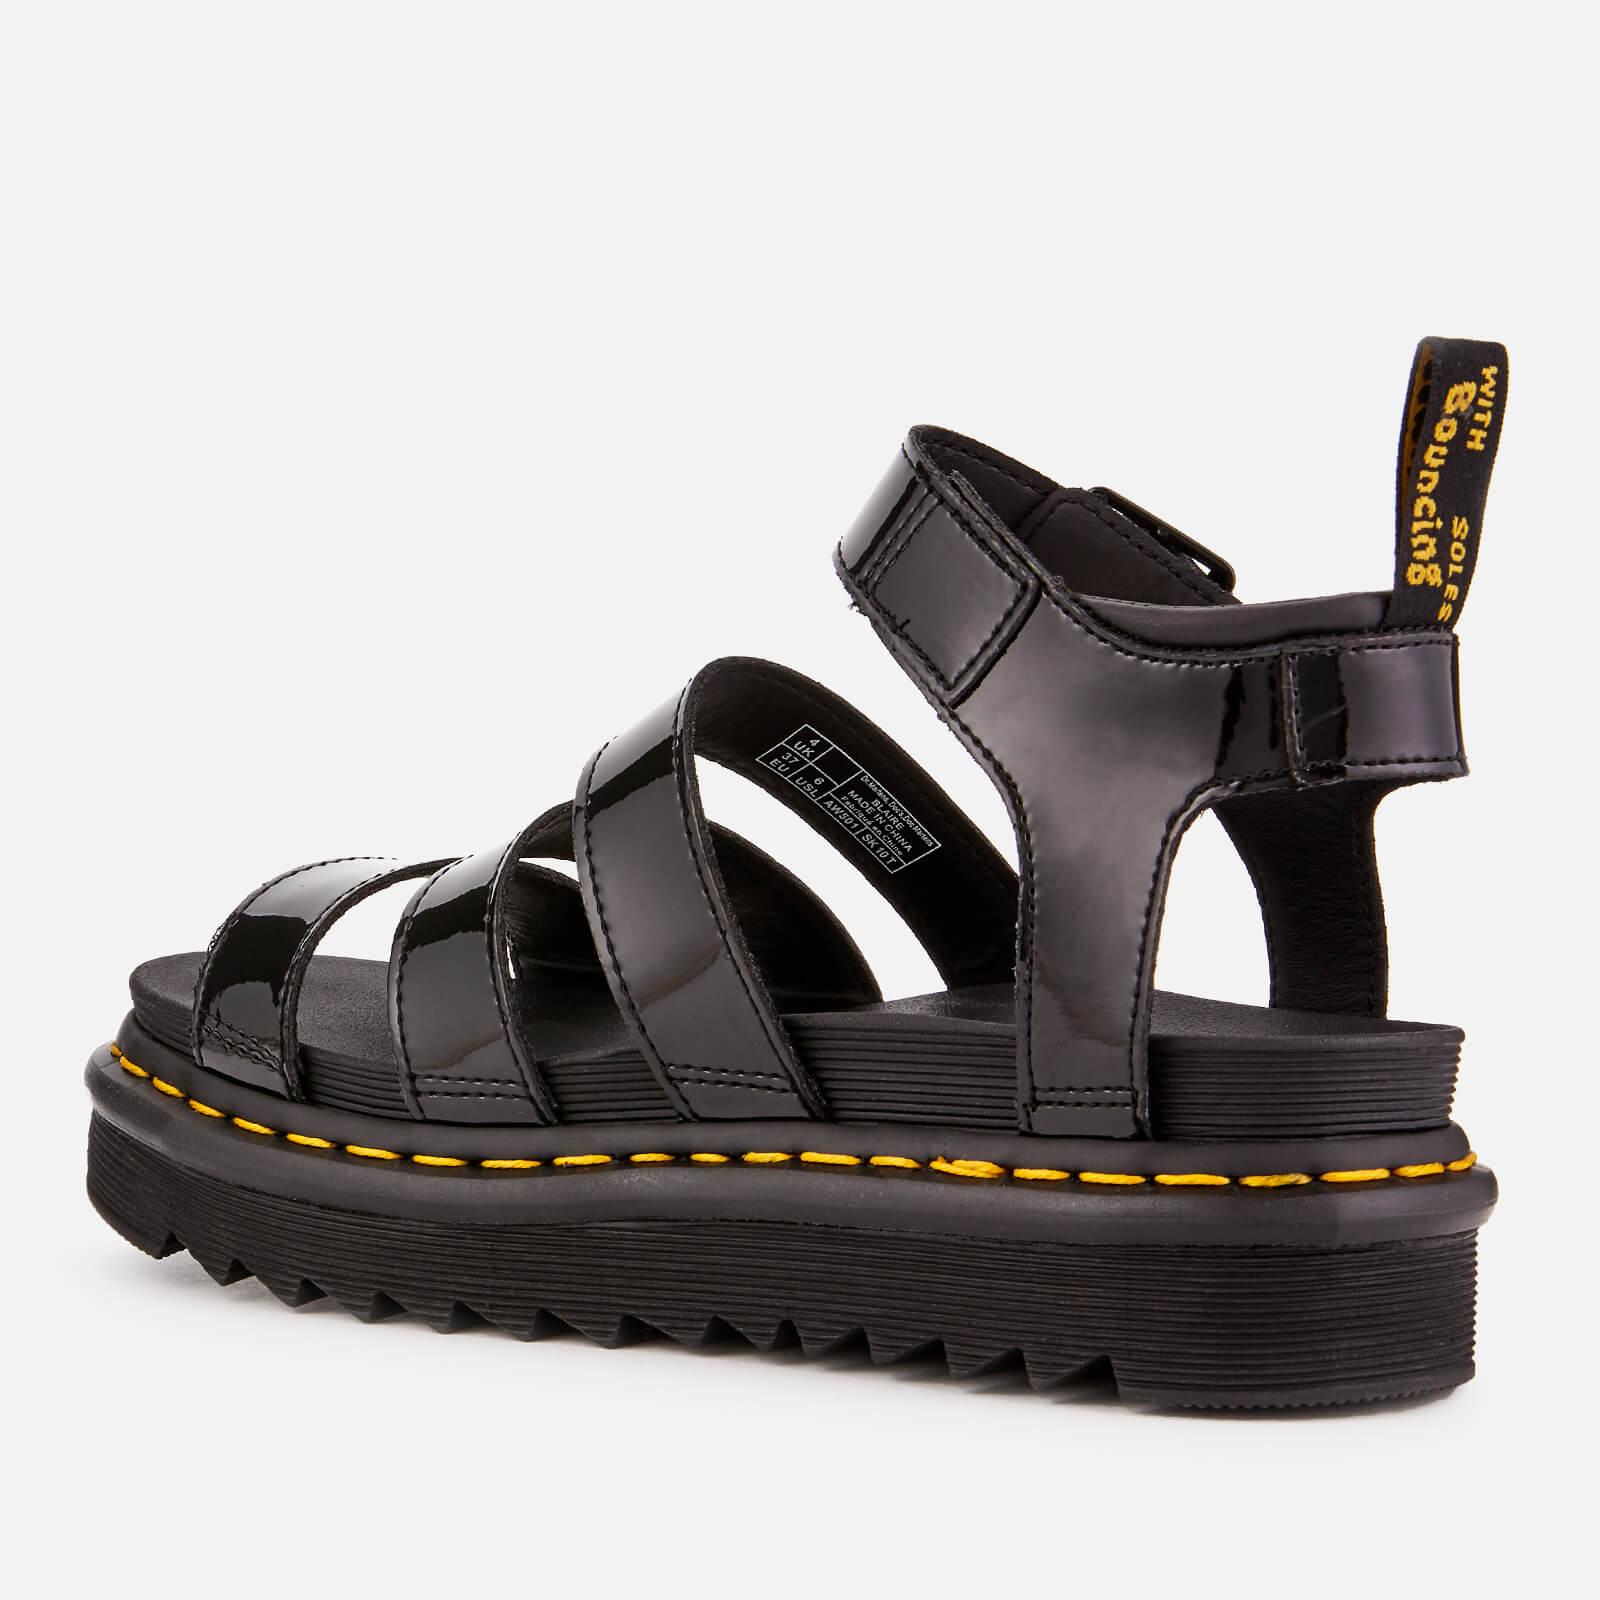 Dr. Martens Blaire Patent Lamper Strappy Sandals in Black - Lyst